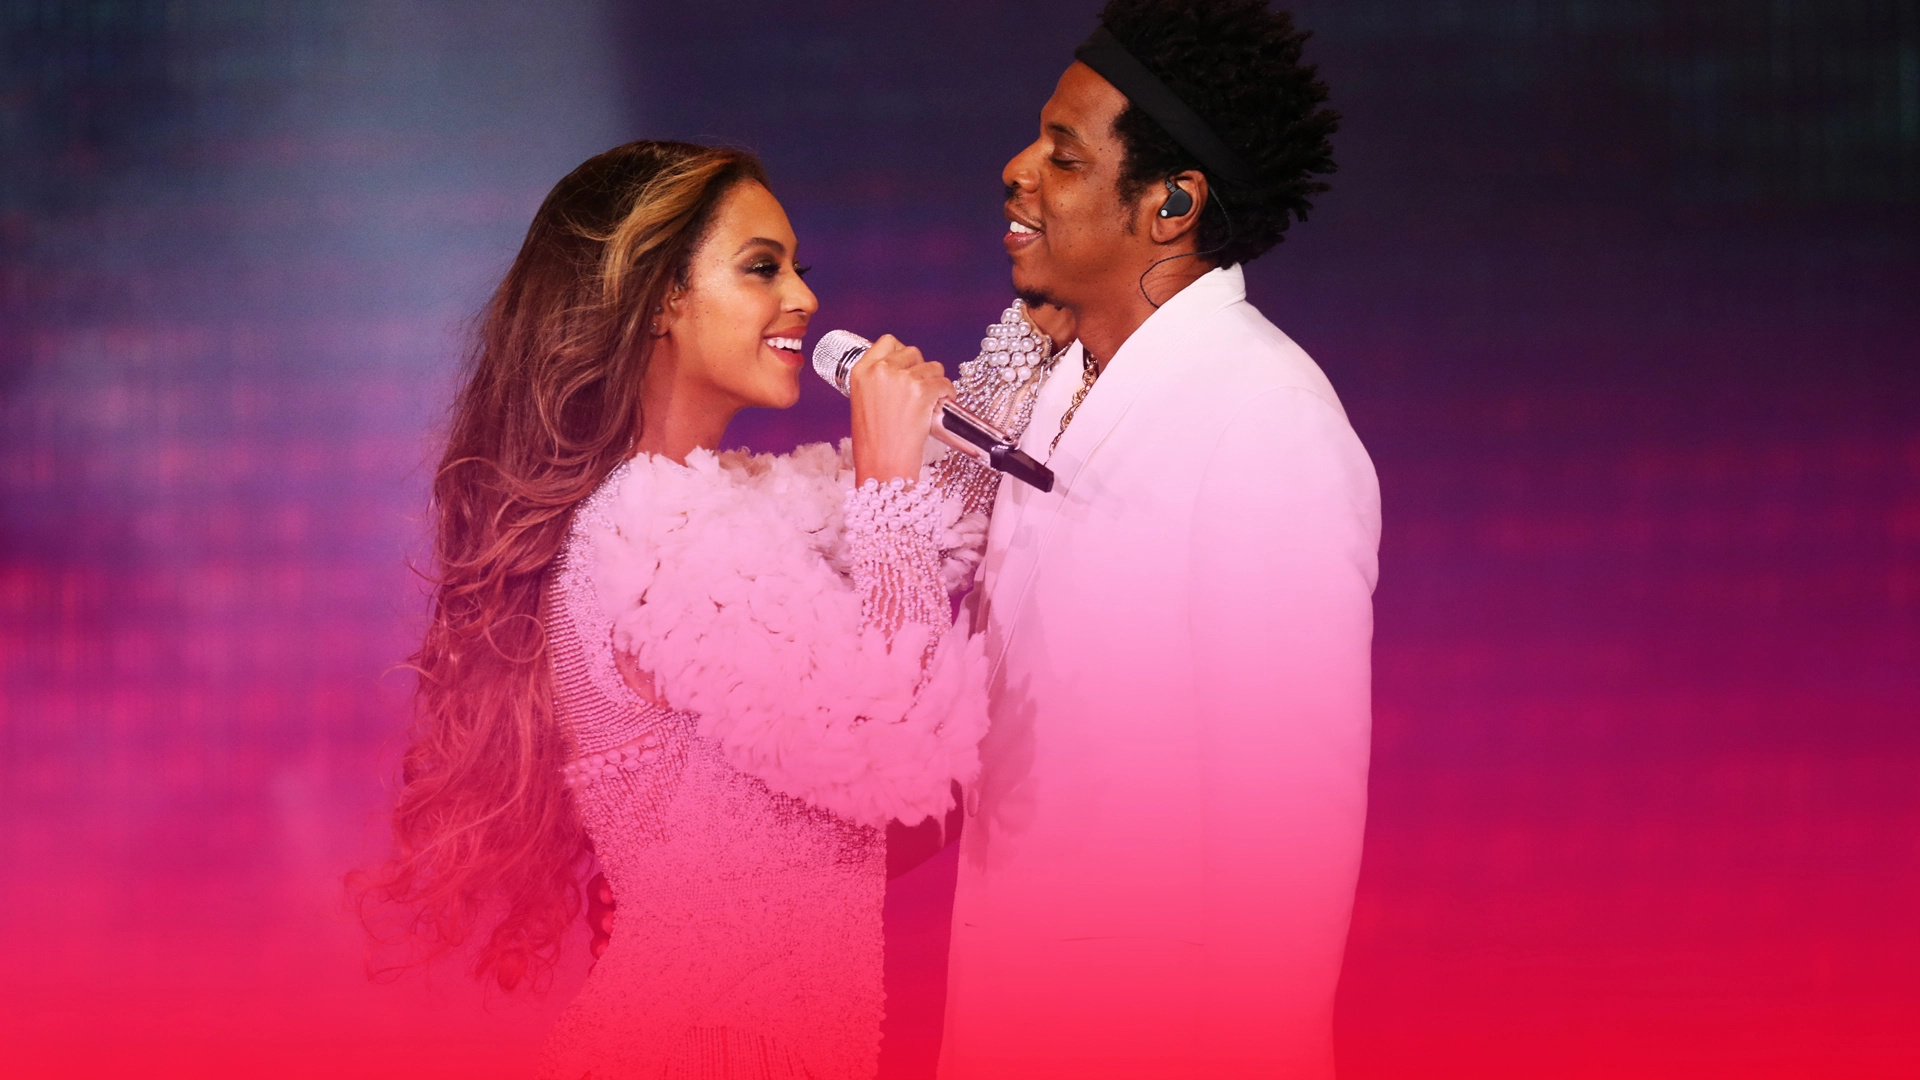 Jay-Z and Beyonce, Activities in 2019, Busy year, SheKnows, 1920x1080 Full HD Desktop